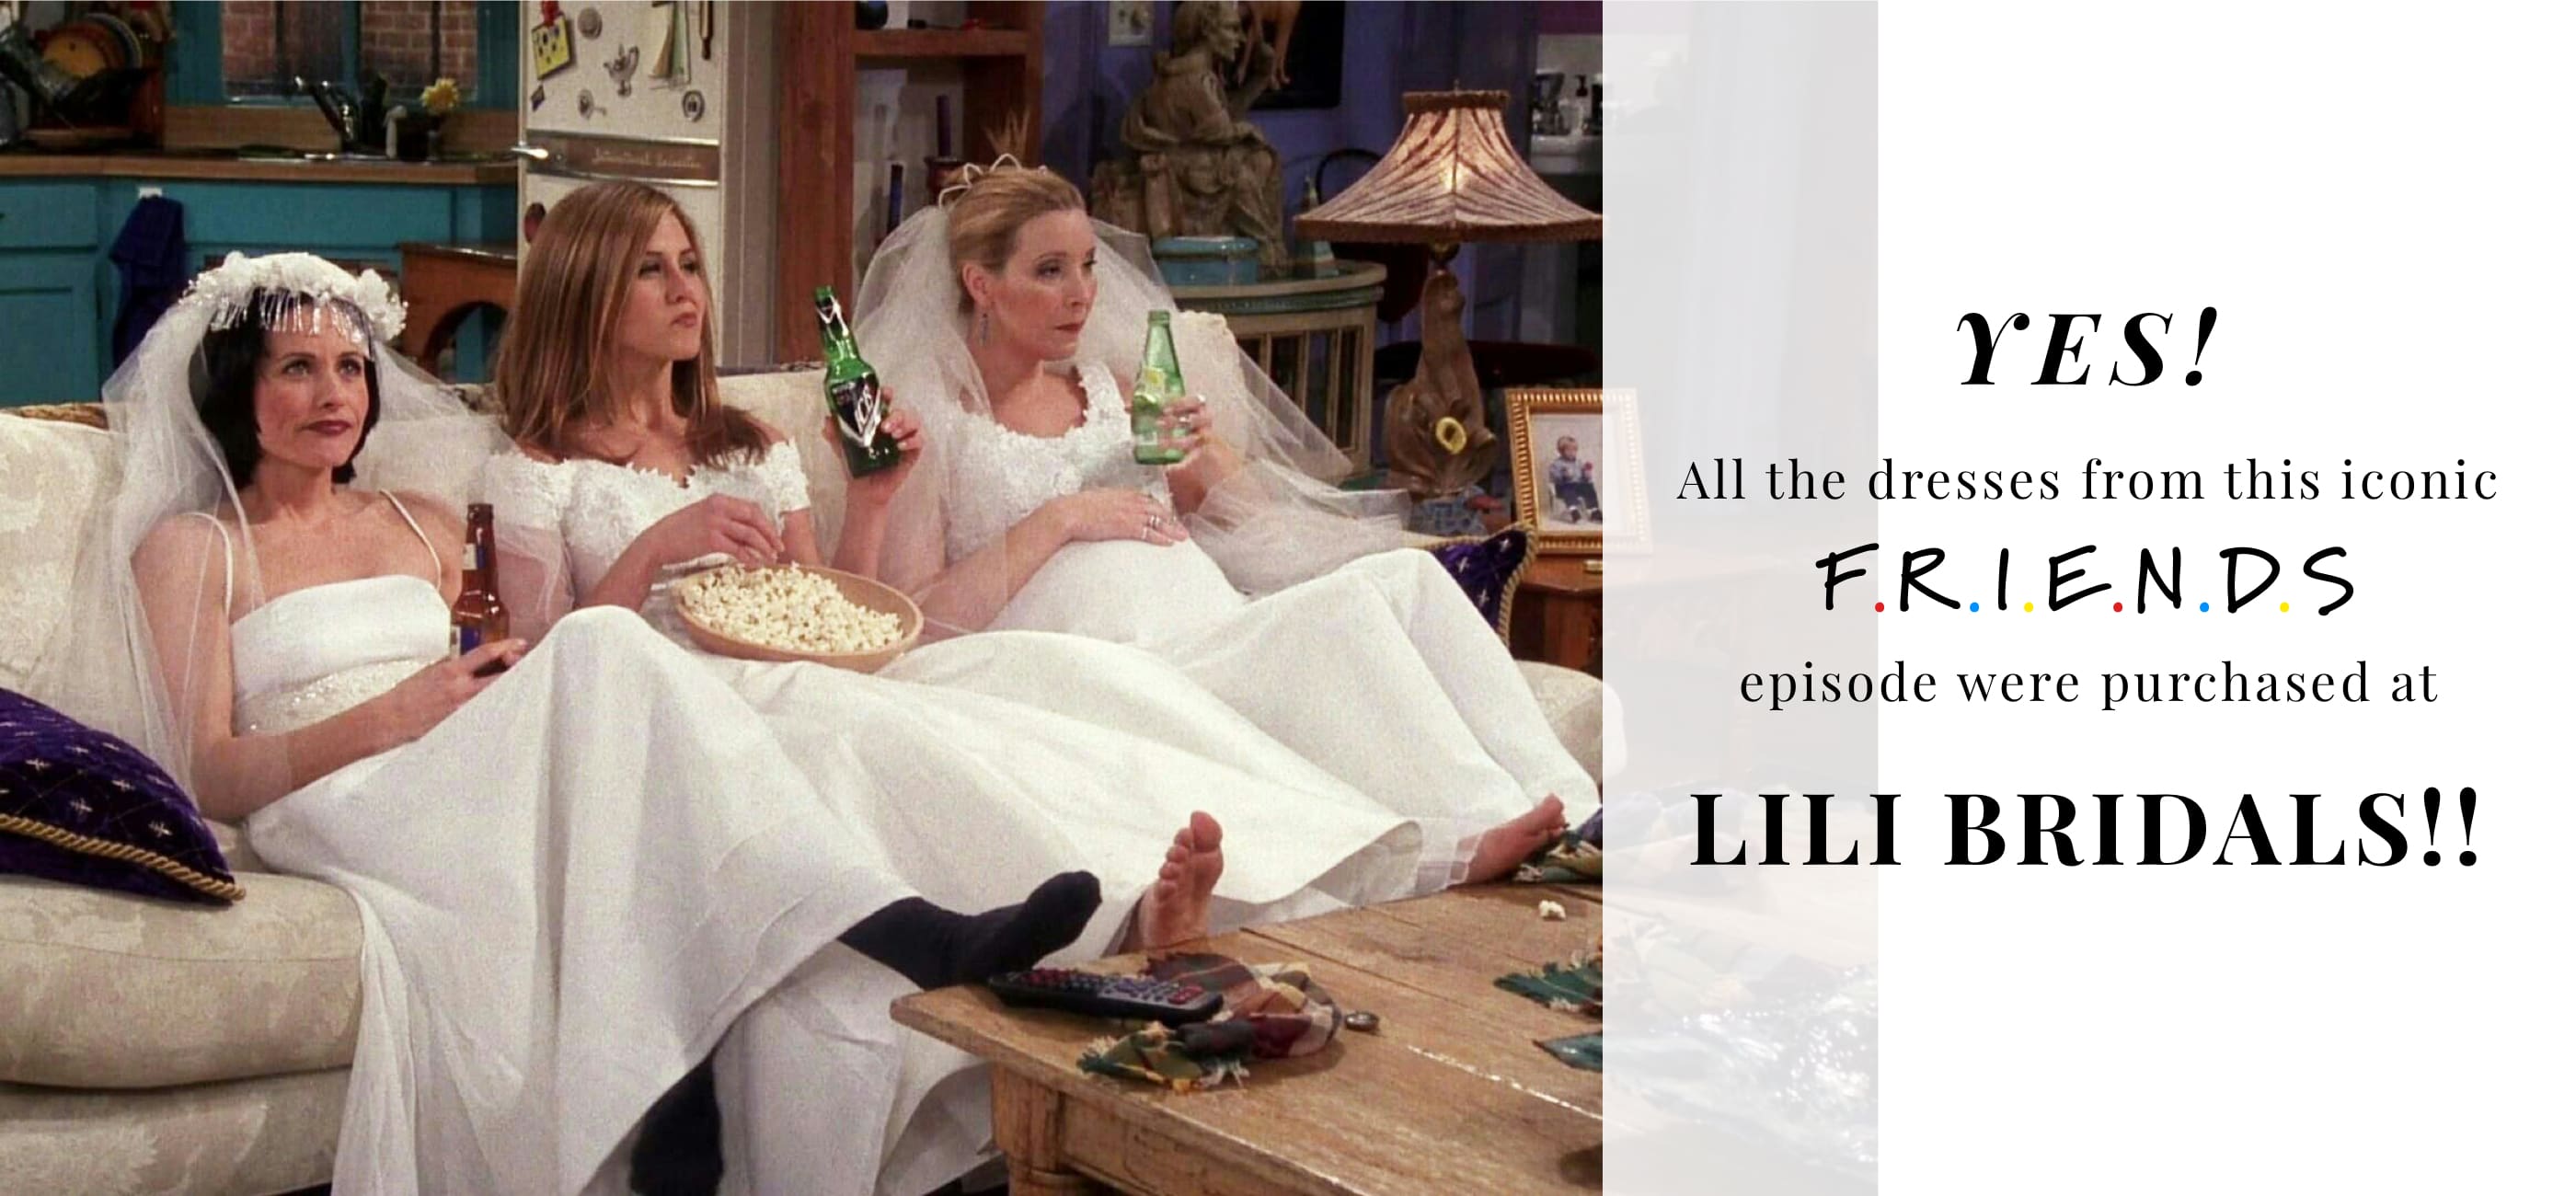 F.R.I.E.N.D.S Cast Sitting In Wedding Dresses During An Episode From TV Show. Dresses Were Purchased At Lili Bridals. Desktop Image